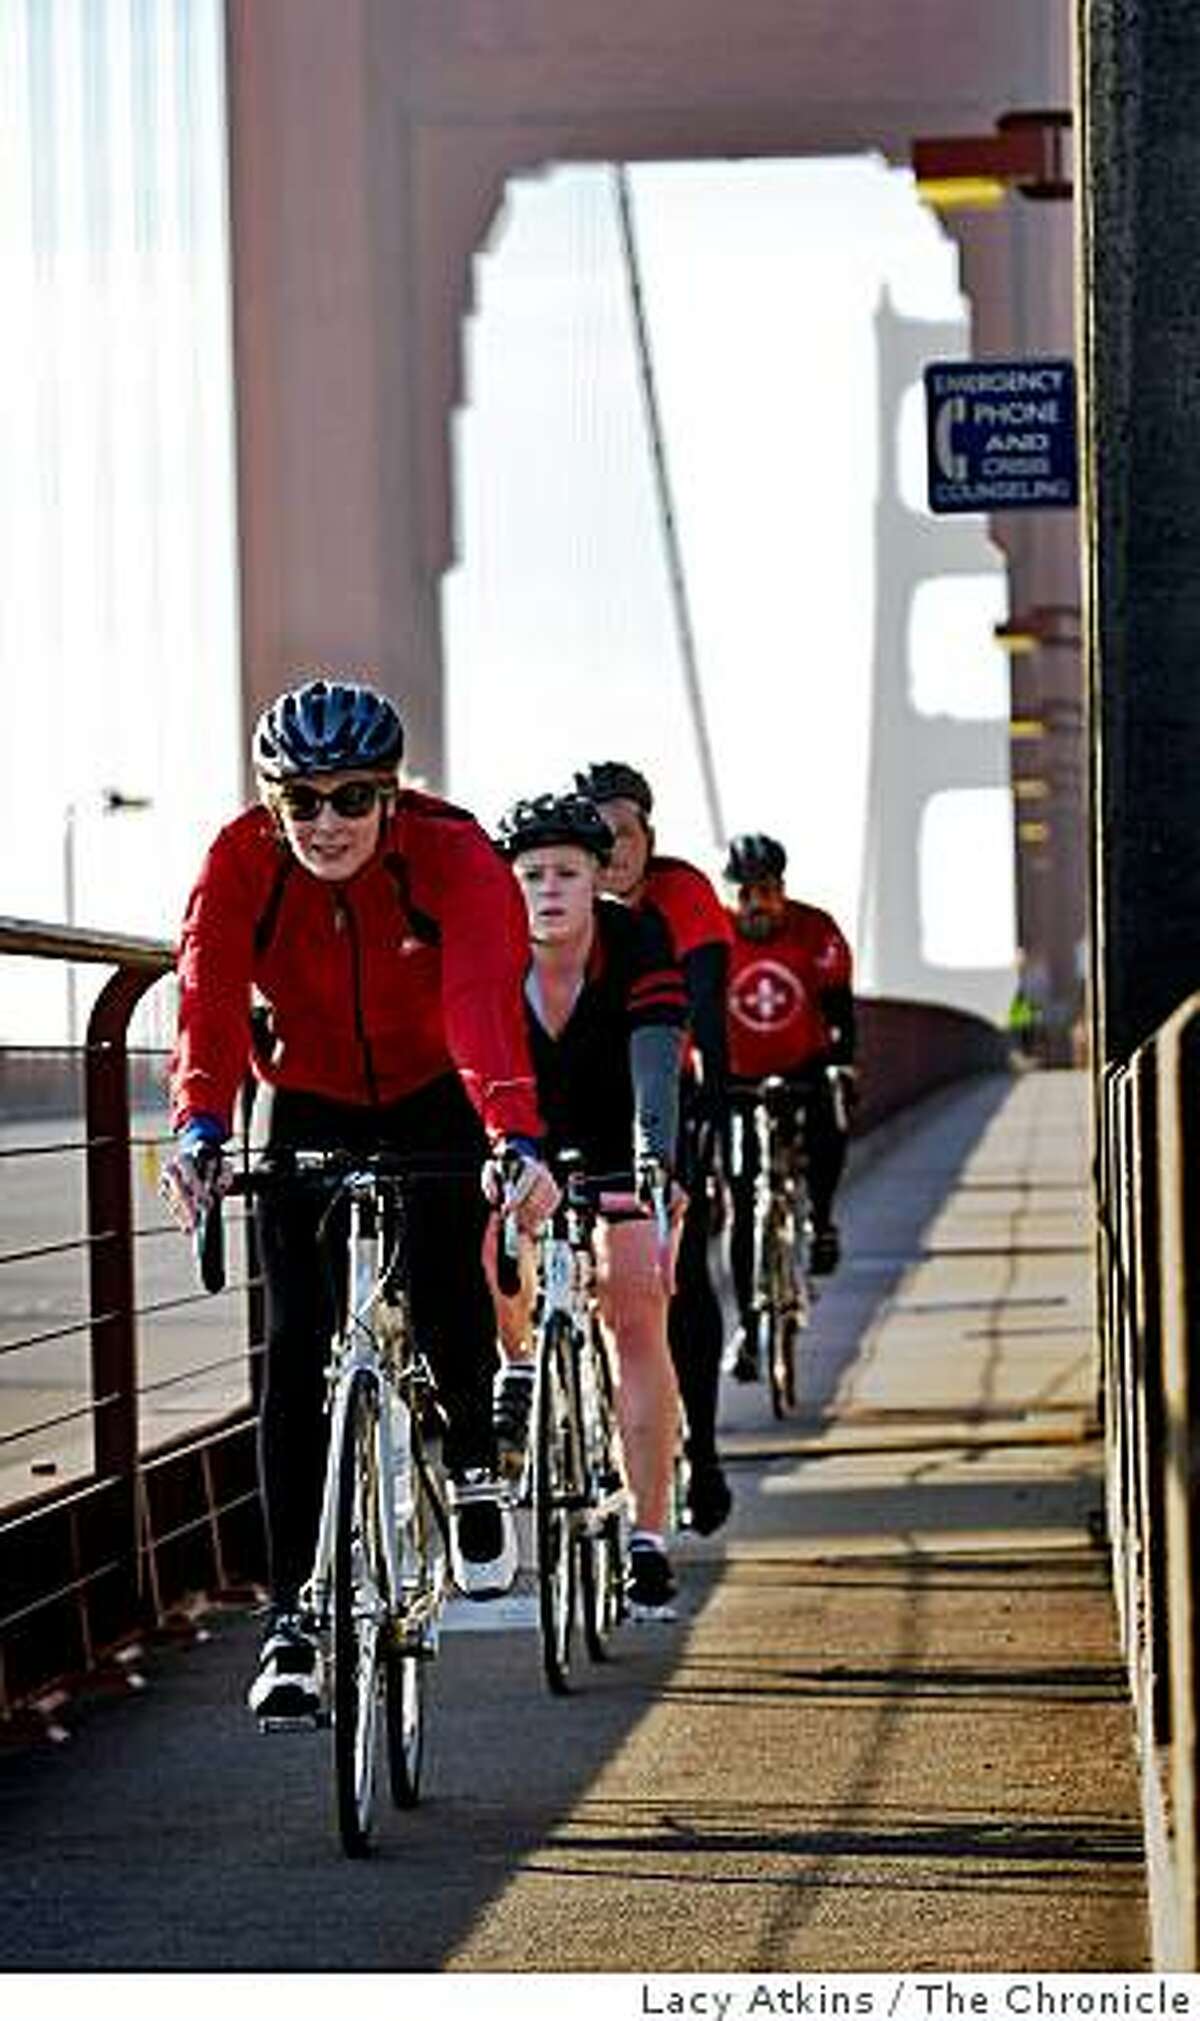 Bike riders from the group Positive Pedaler start their training for the World AIDS Ride, as they ride along the westend of the Golden Gate Bridge, Sunday Nov. 30, 2008, in San Francisco, Calif. Positive Pedaler is a group of riders who raises money and awareness to stop AIDS.